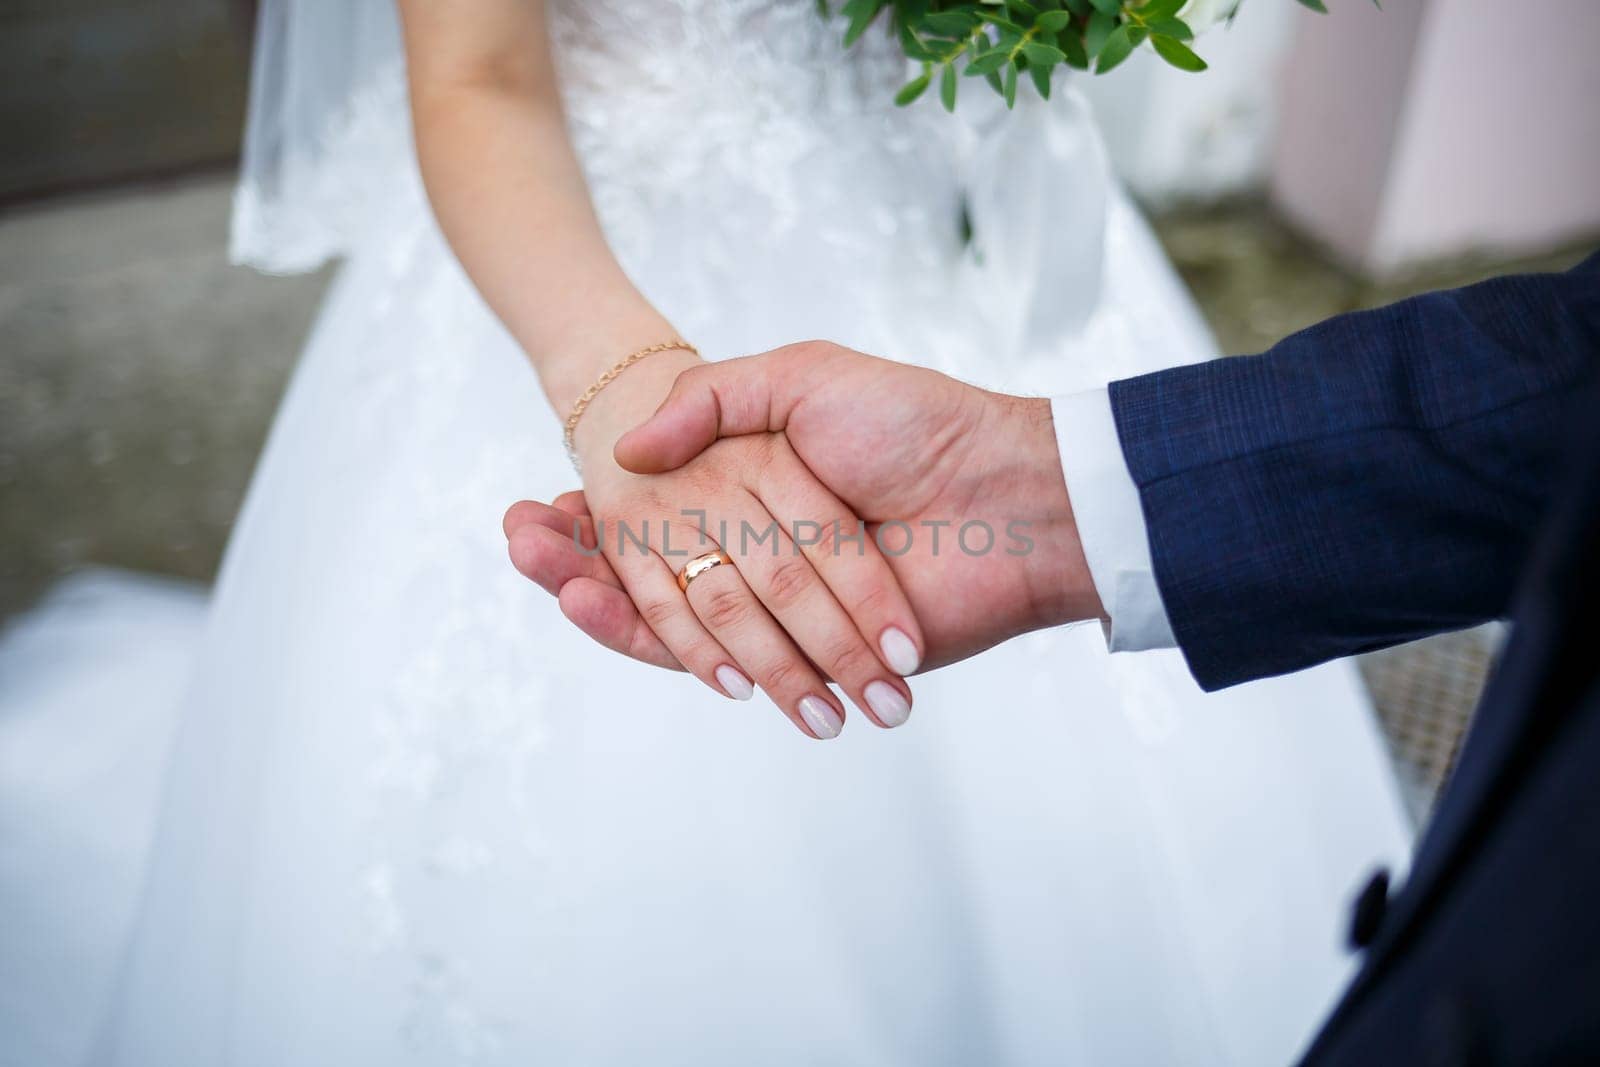 Newlyweds on wedding day, wedding couple holding hands, bride and groom by Dmitrytph